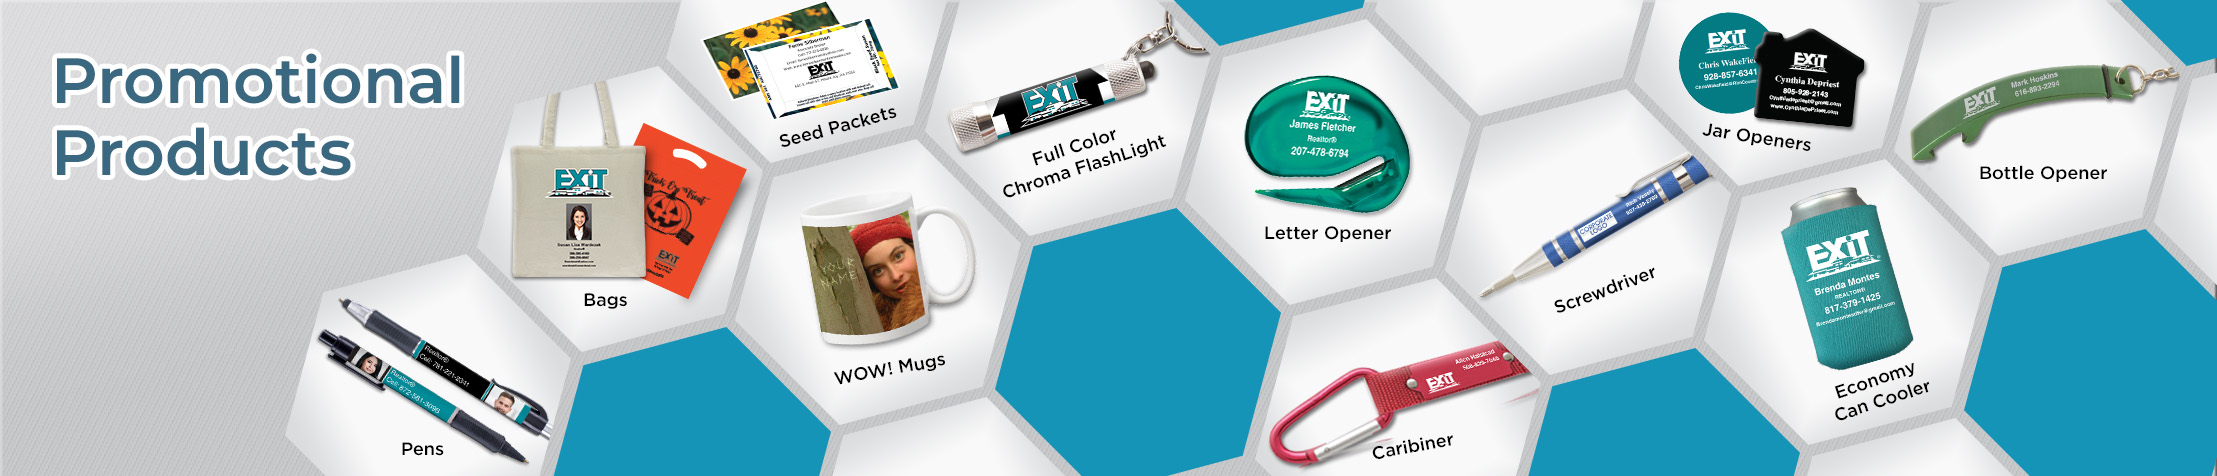 Exit Realty Real Estate Promotional Products - Exit Realty approved vendor personalized promotional pens, key chains, tote bags, flashlights, mugs | BestPrintBuy.com